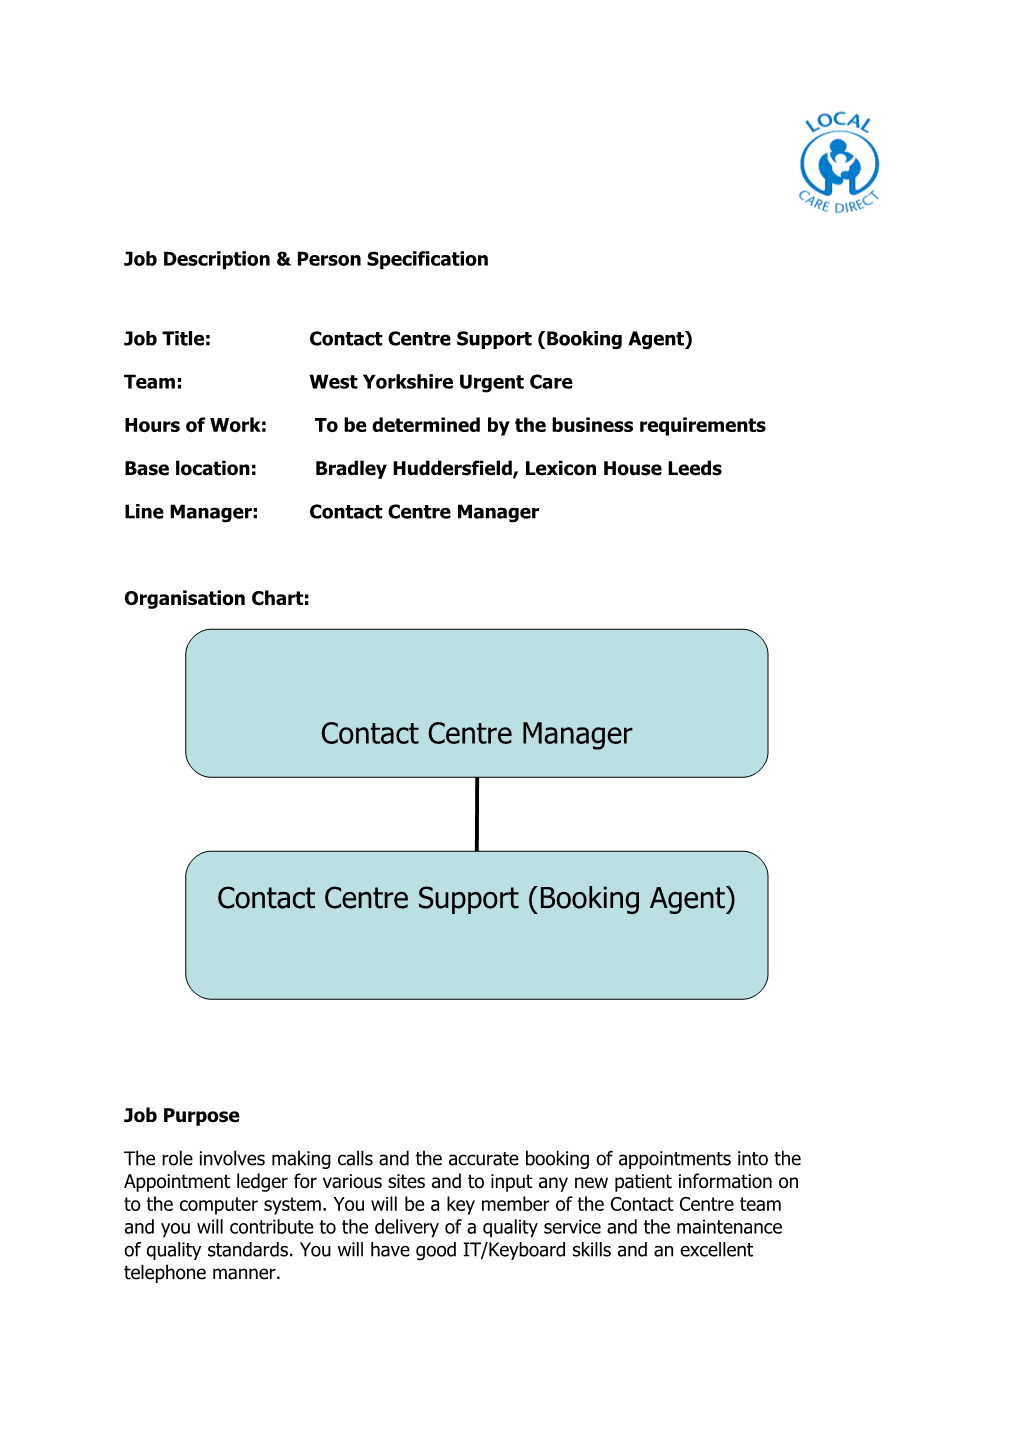 Job Title: Contact Centre Support (Booking Agent)